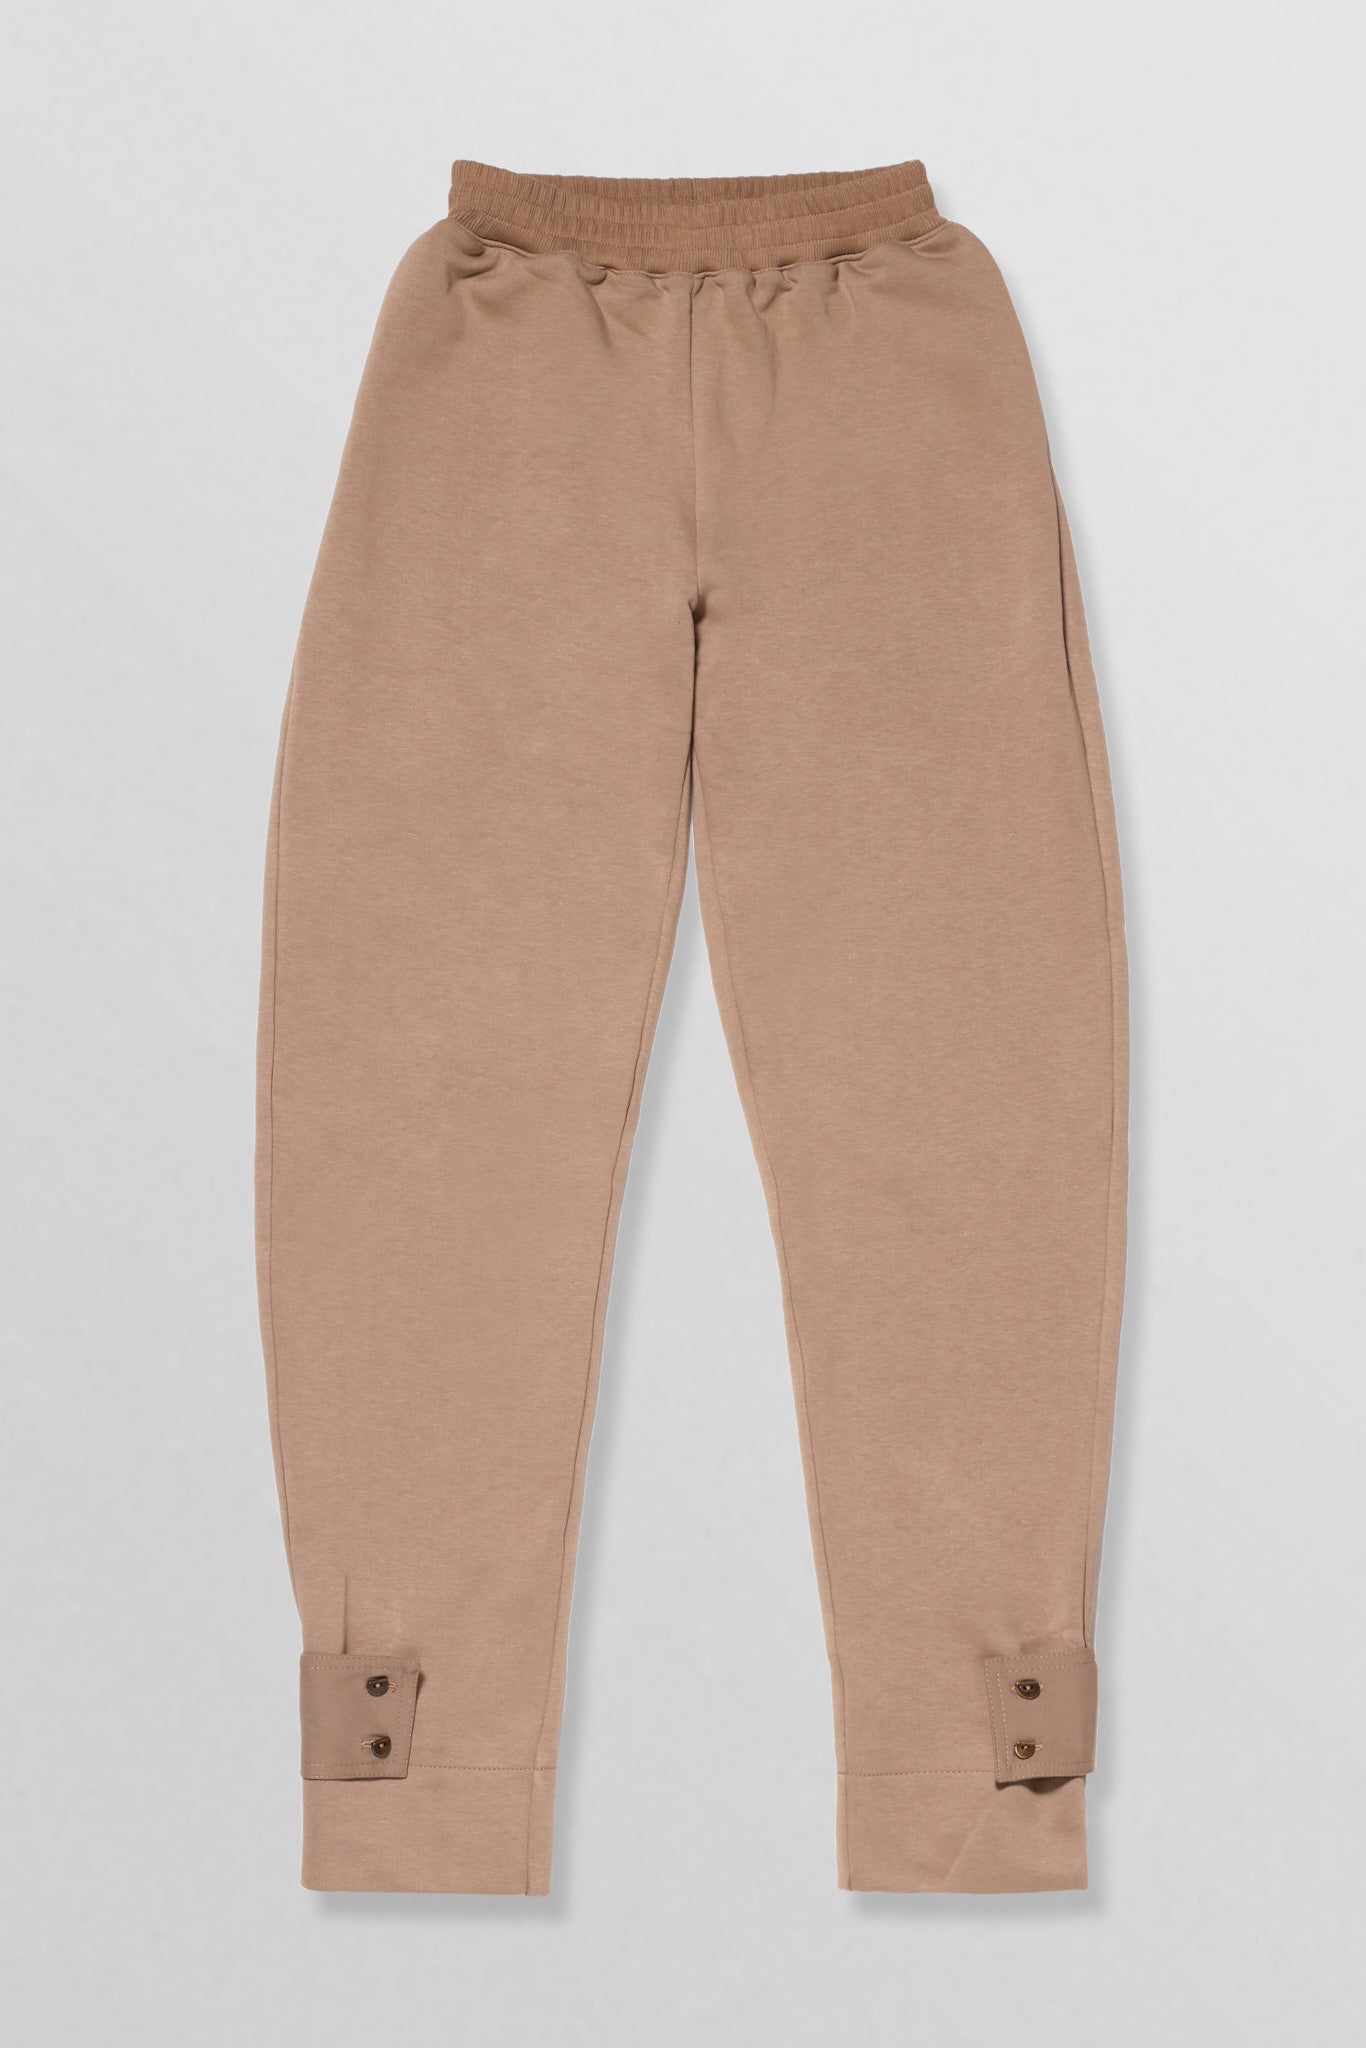 Relaxed cotton track pants with detachable tab cuffs in tan